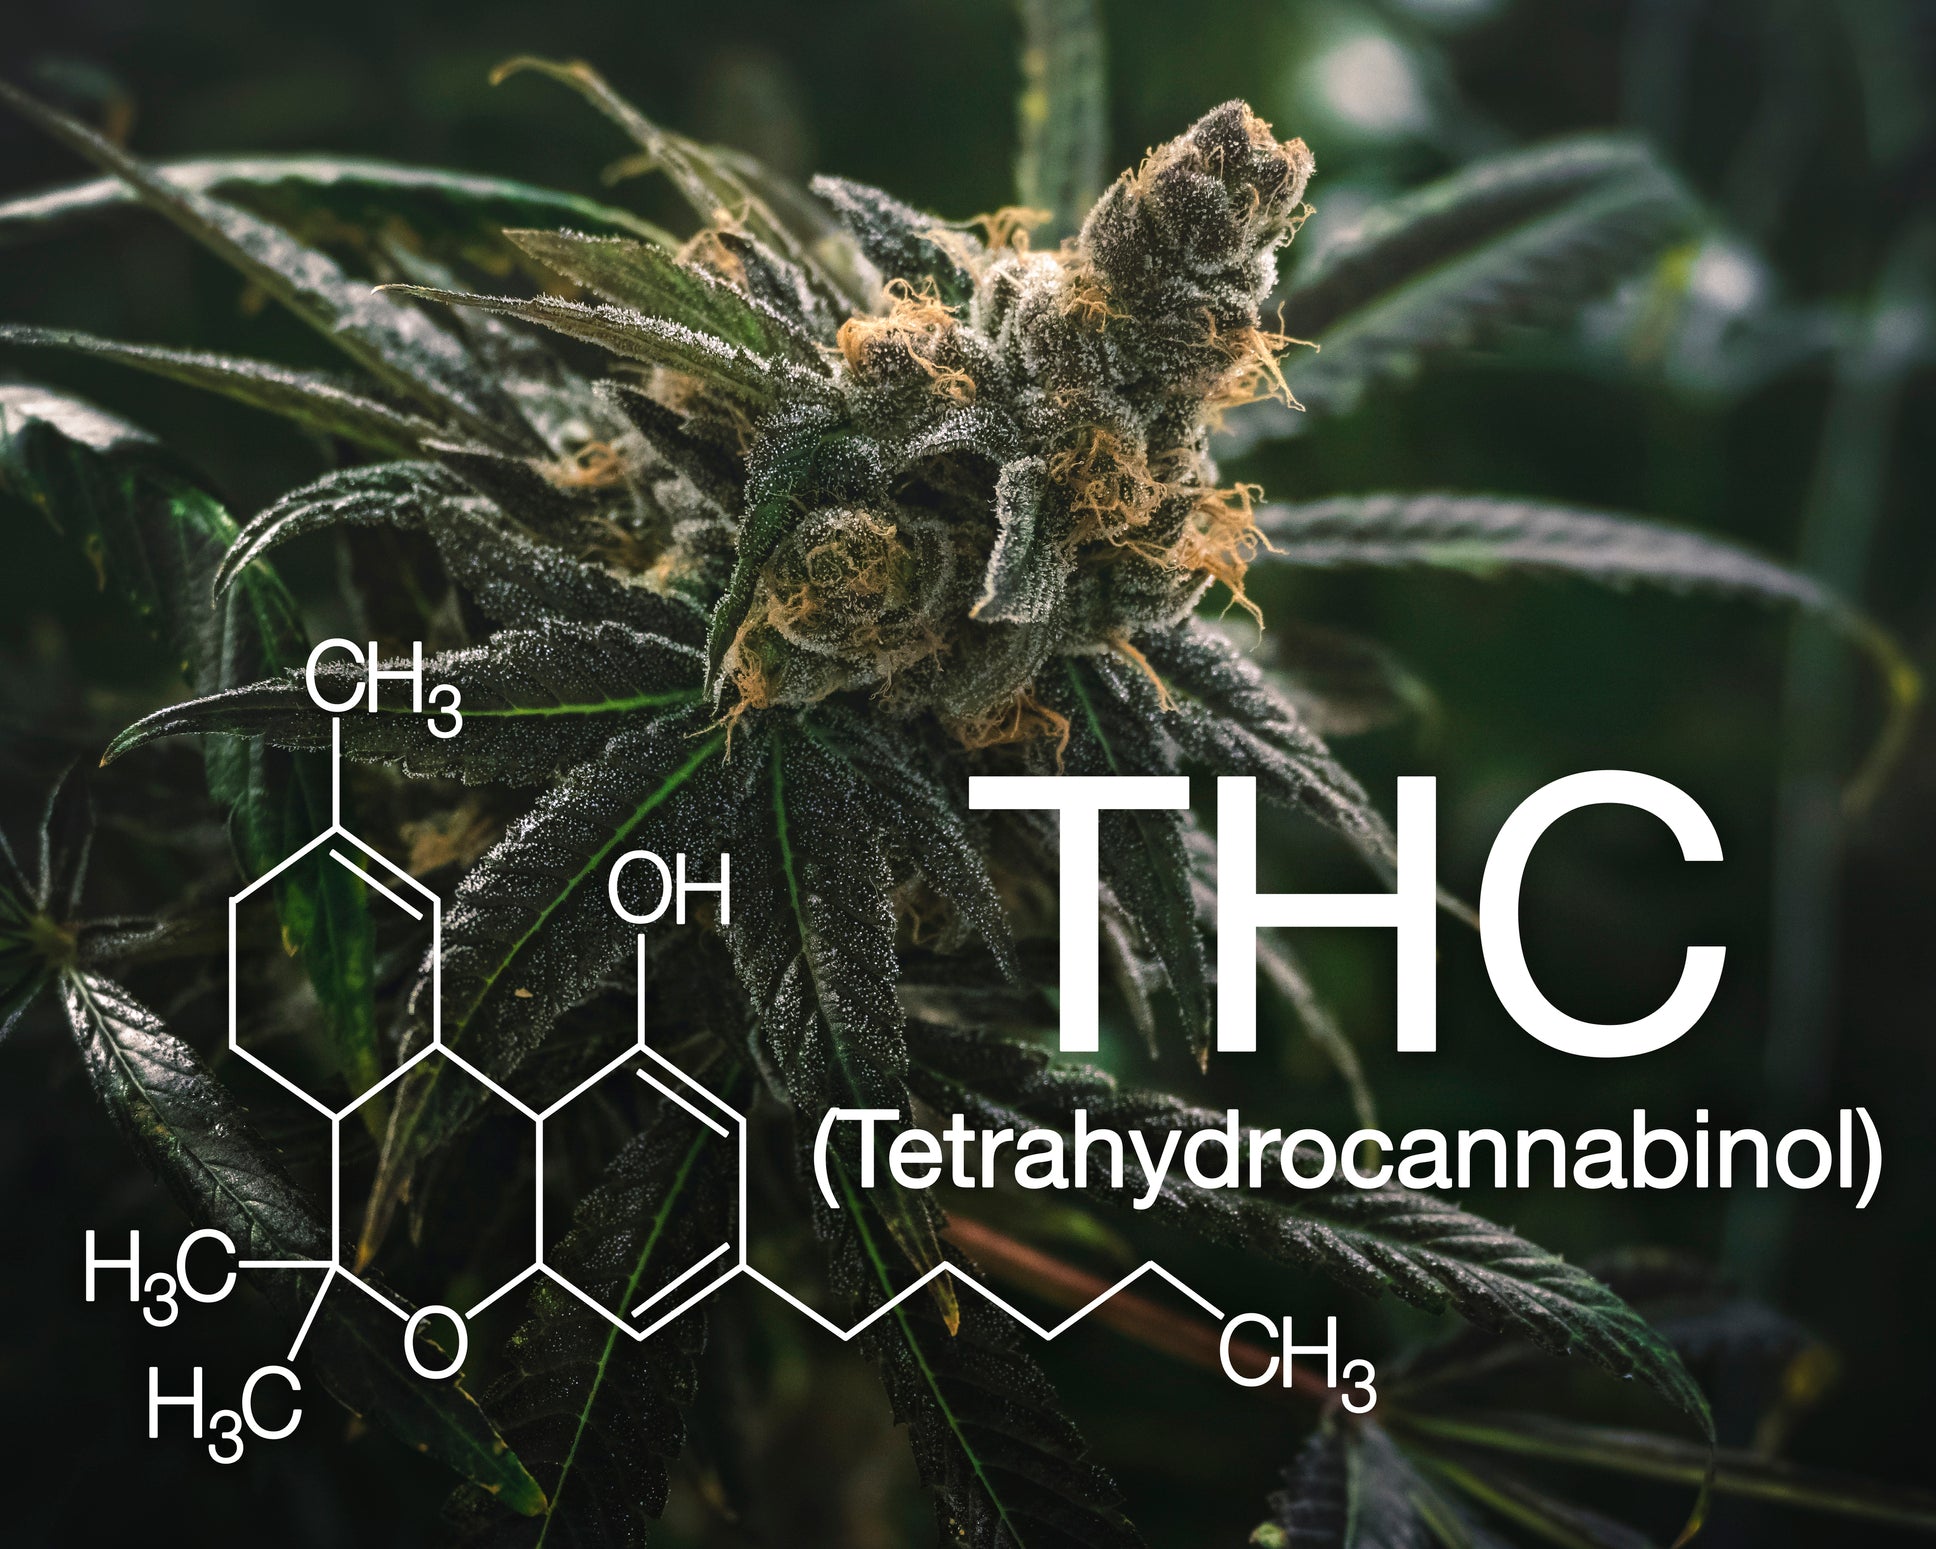 A cannabis flower nug with orange hairs has the chemical structure of THC, the psychoactive cannabinoid, written out.